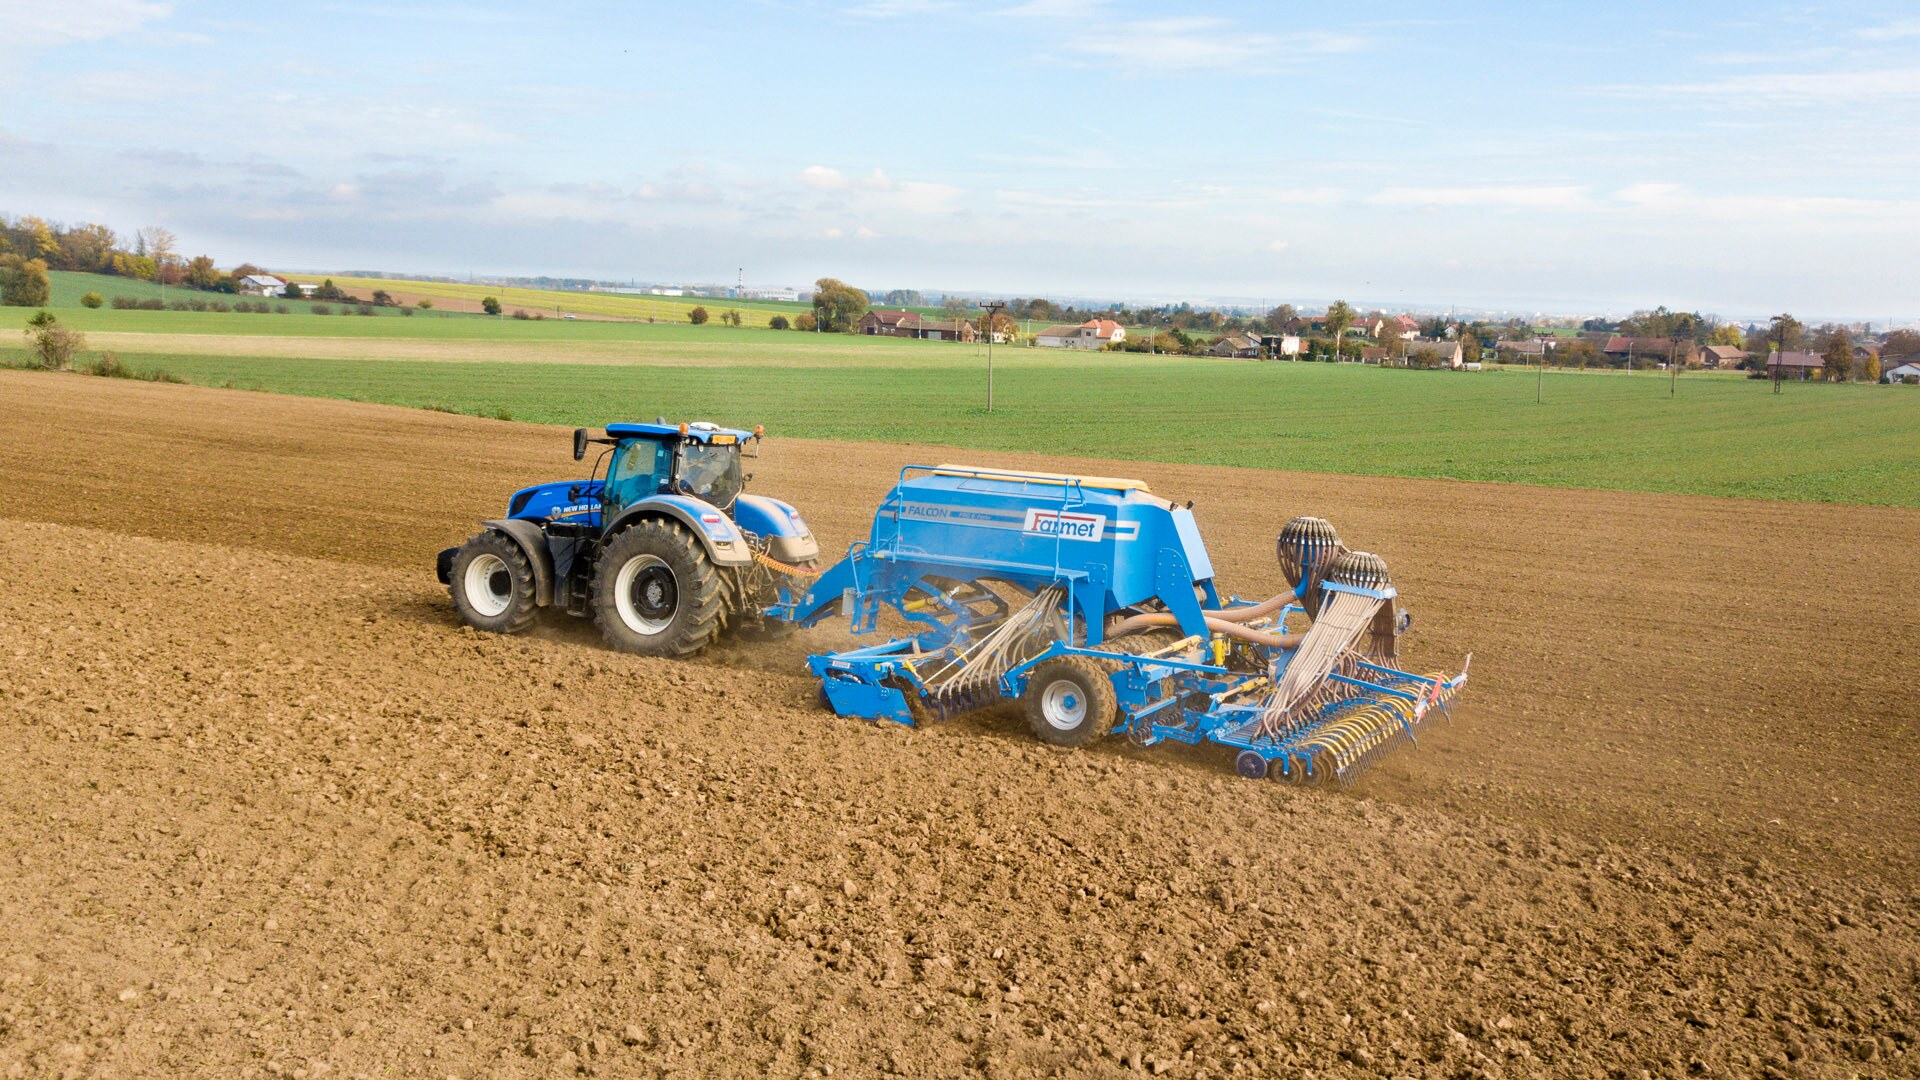 Modular sowing machine Falcon PRO now with section control and new